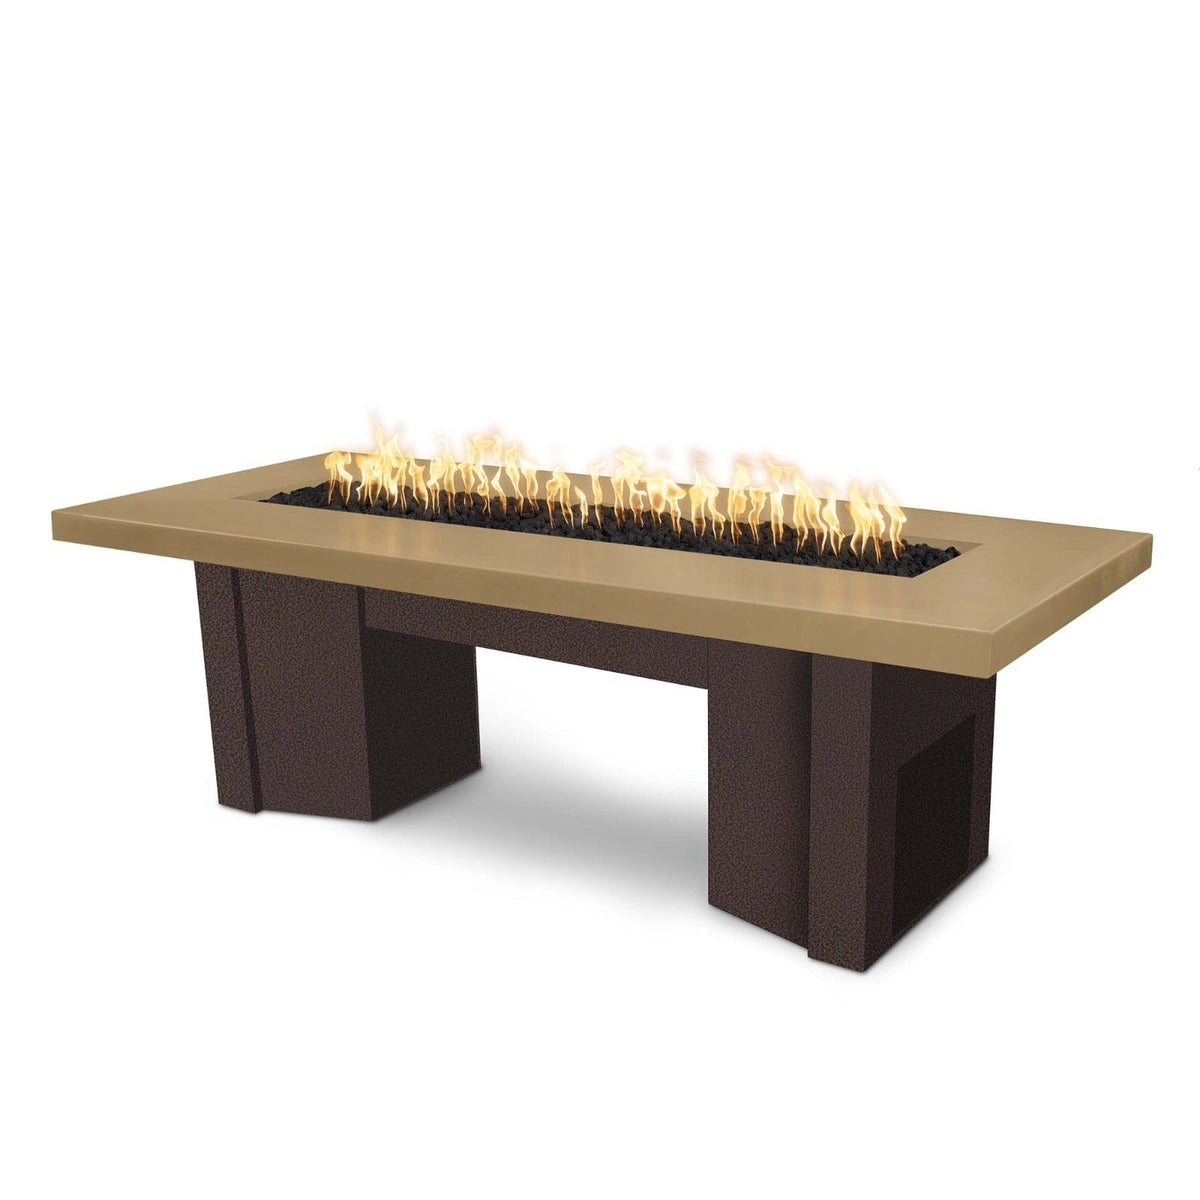 The Outdoor Plus Fire Features Brown (-BRN) / Copper Vein Powder Coated Steel (-CPV) The Outdoor Plus 60&quot; Alameda Fire Table Smooth Concrete in Liquid Propane - 110V Plug &amp; Play Electronic Ignition / OPT-ALMGFRC60EKIT-LP